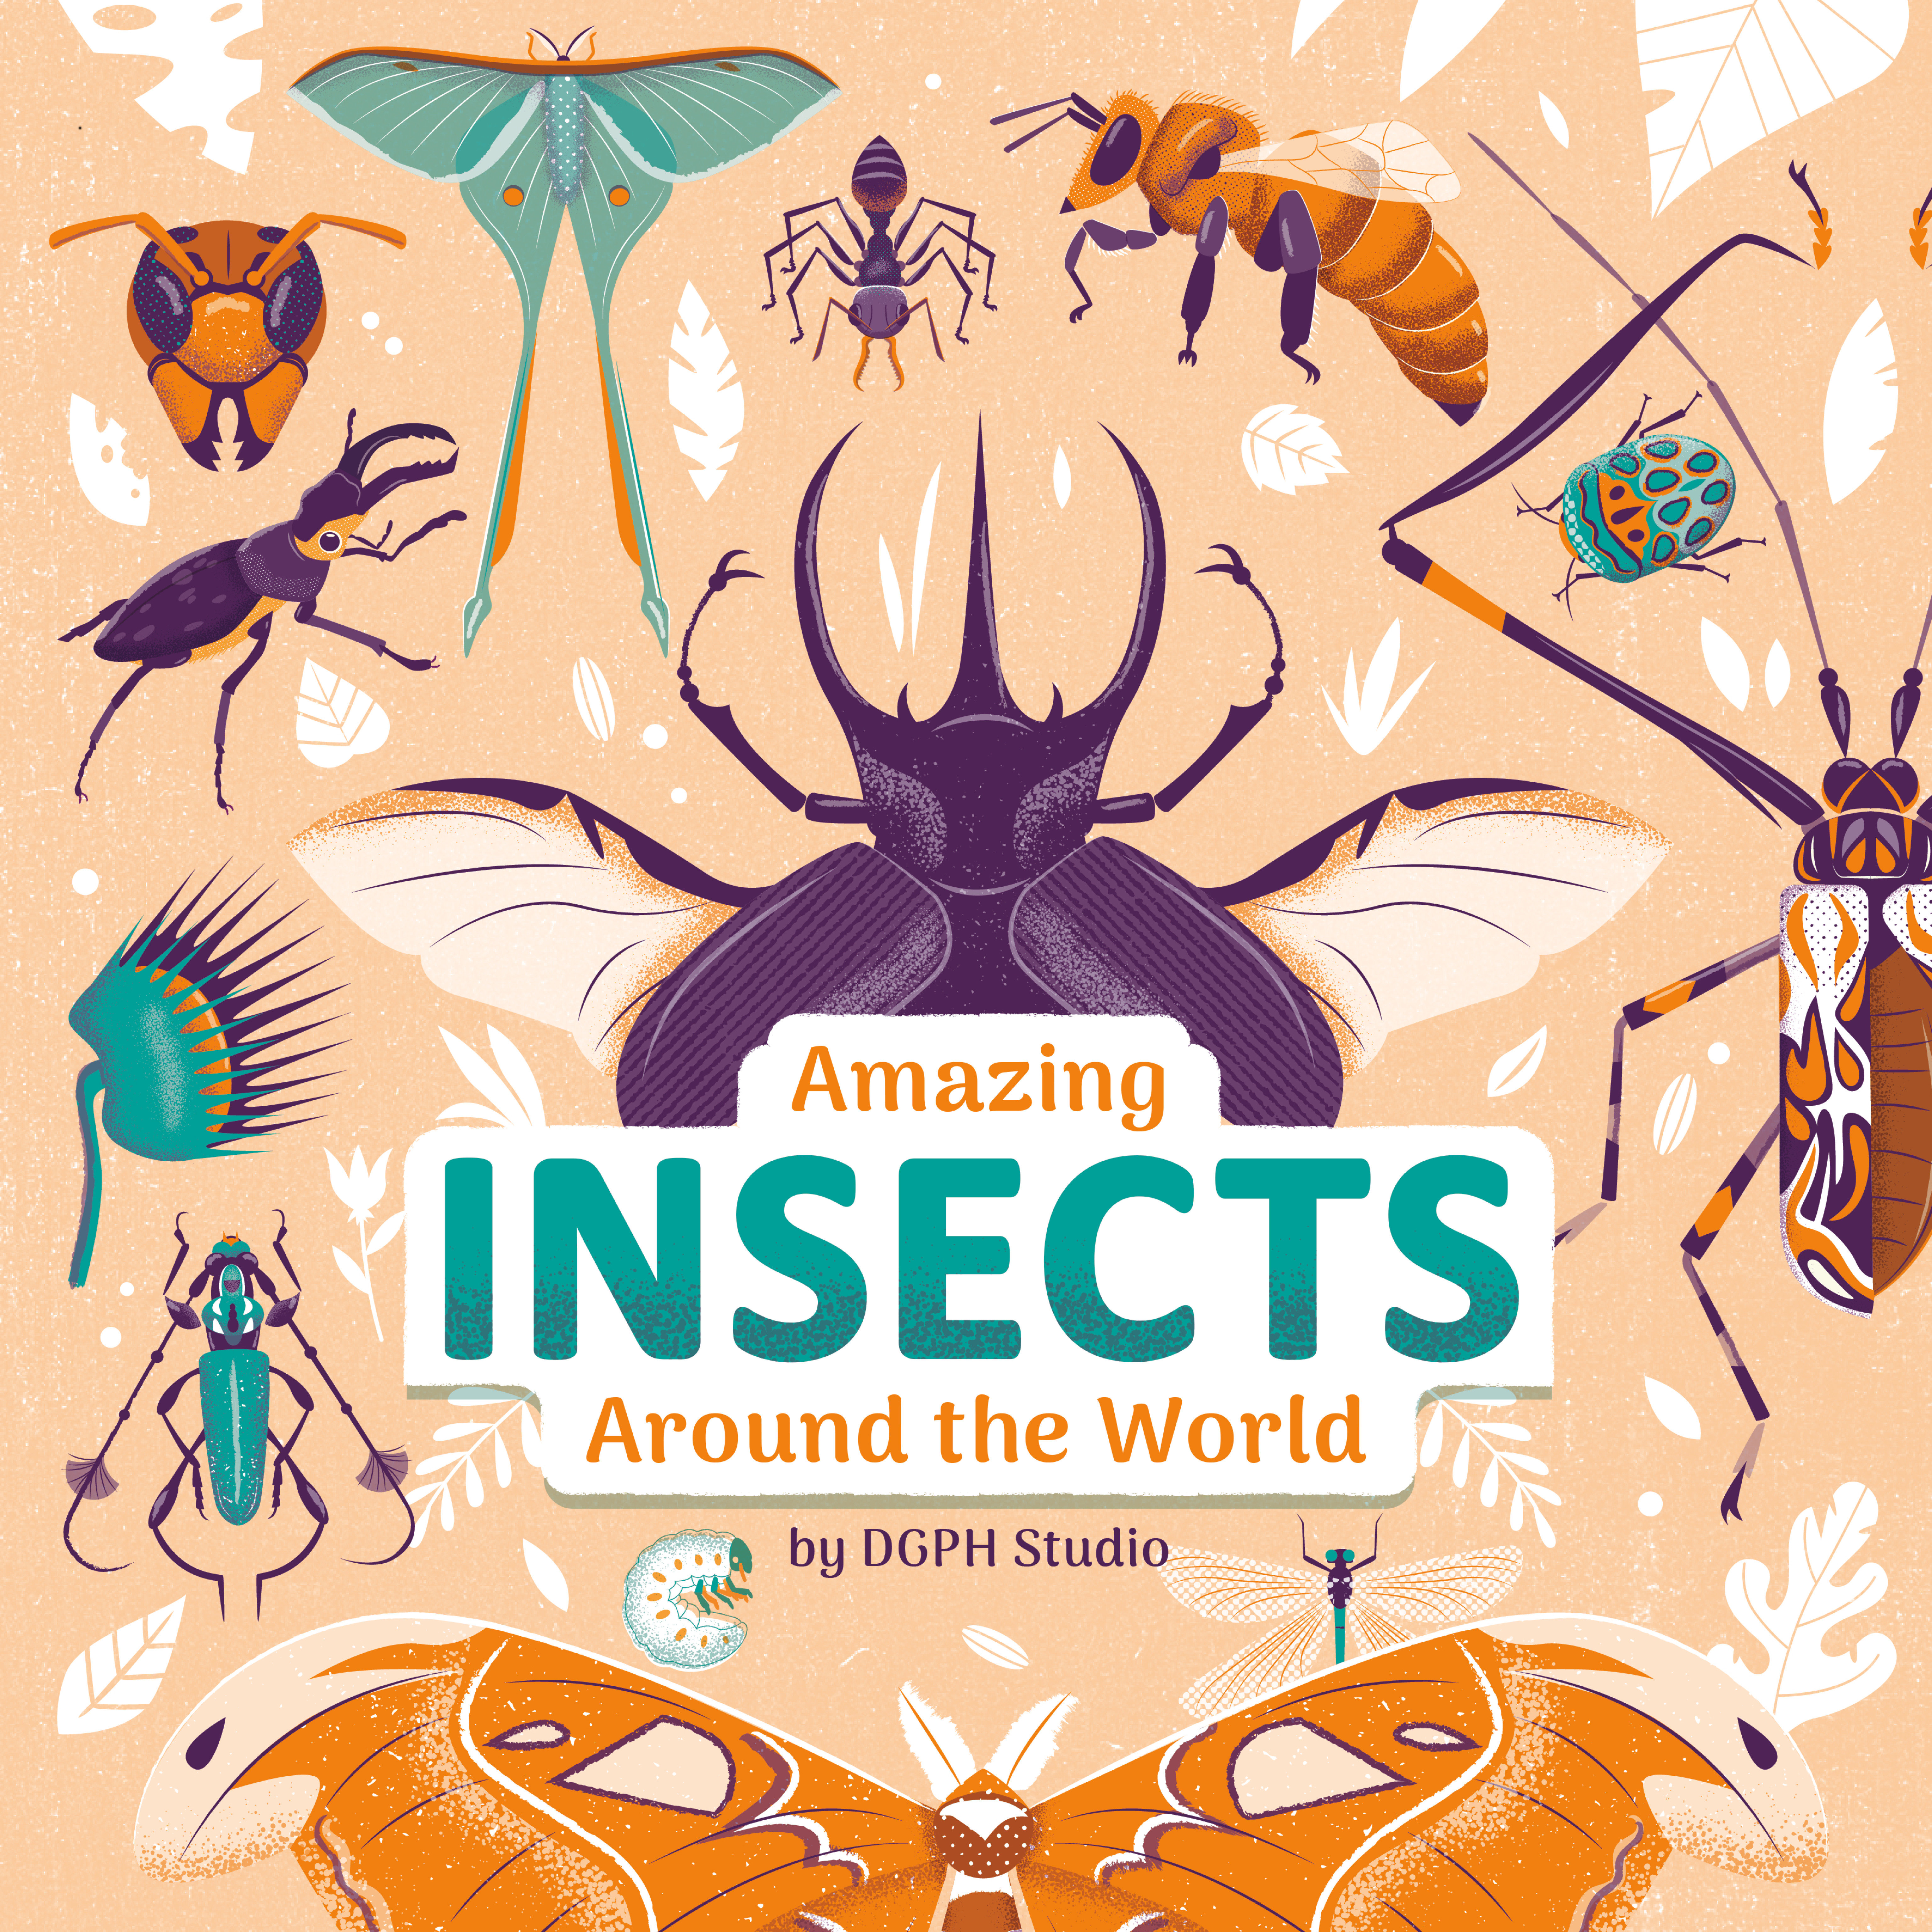 Amazing Insects Around The World (Hardcover Book)